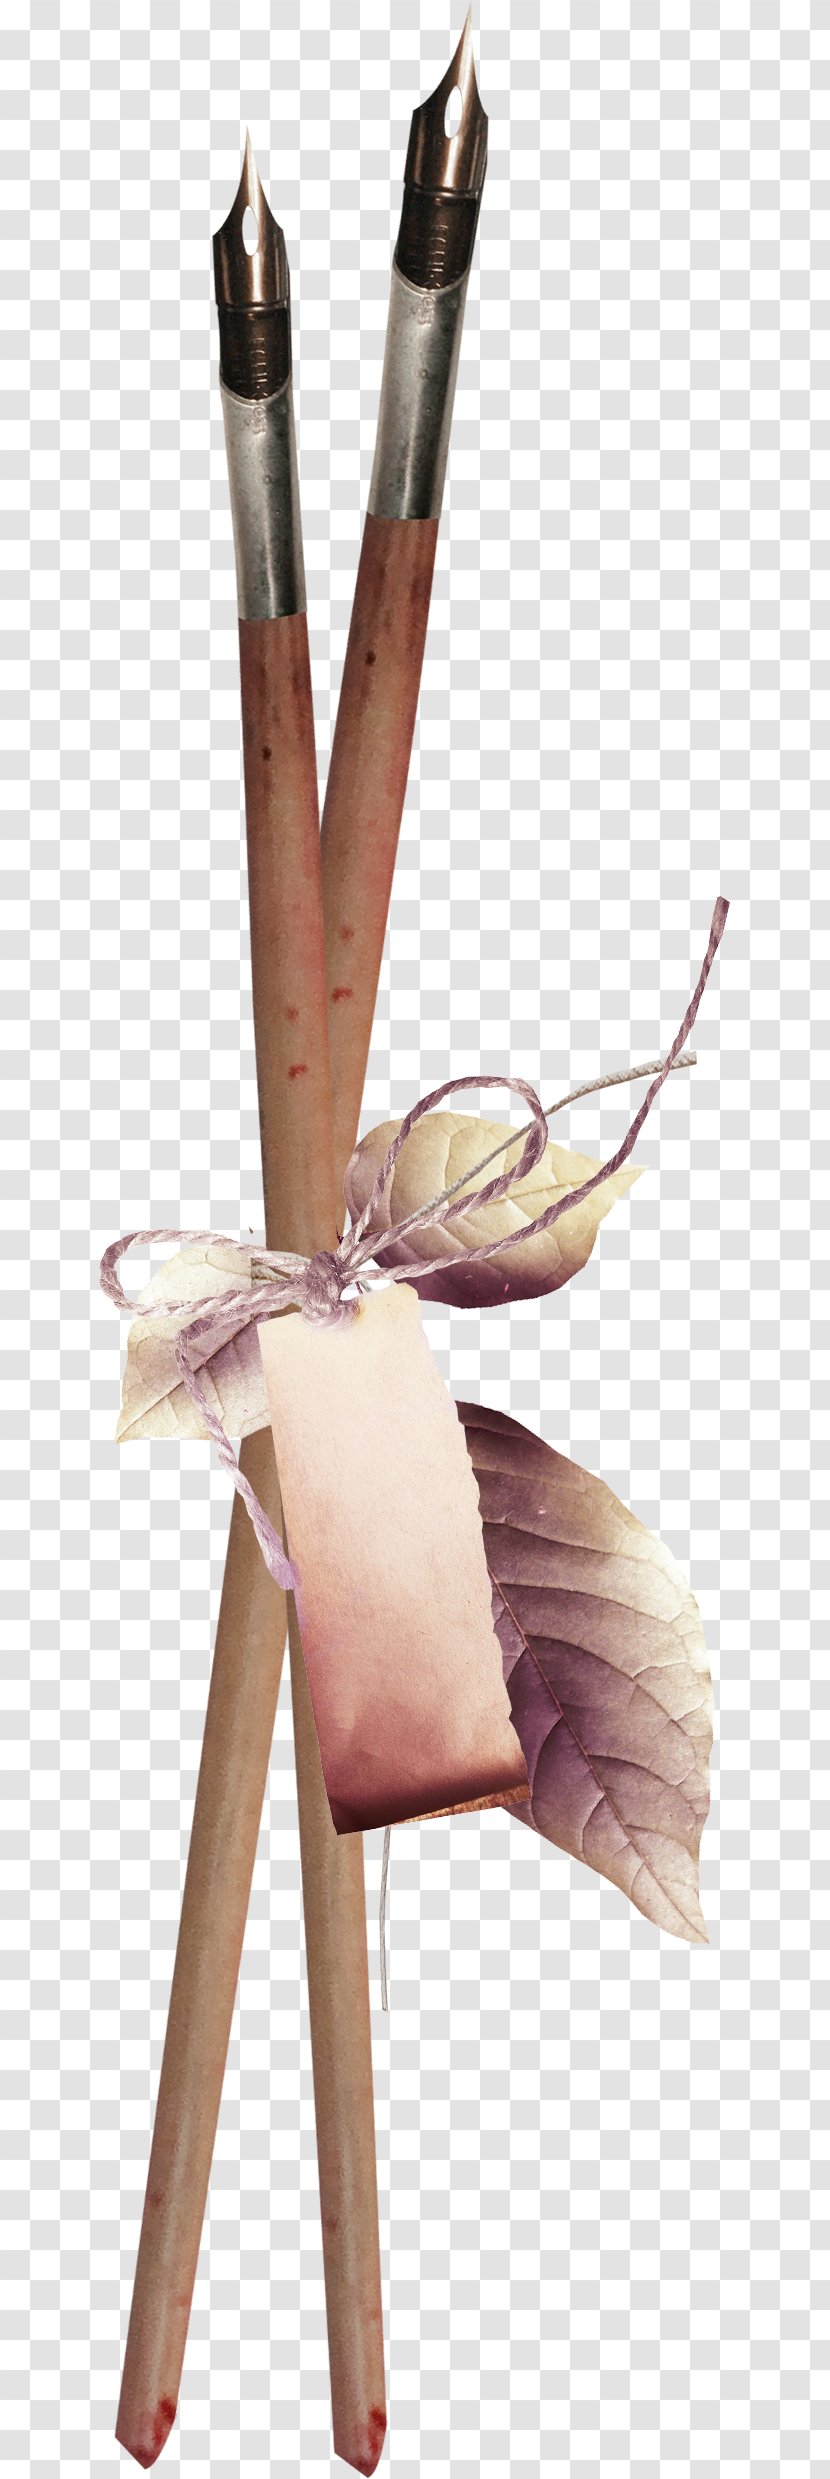 Paper Material - Document - Rope Leaves Pen Transparent PNG